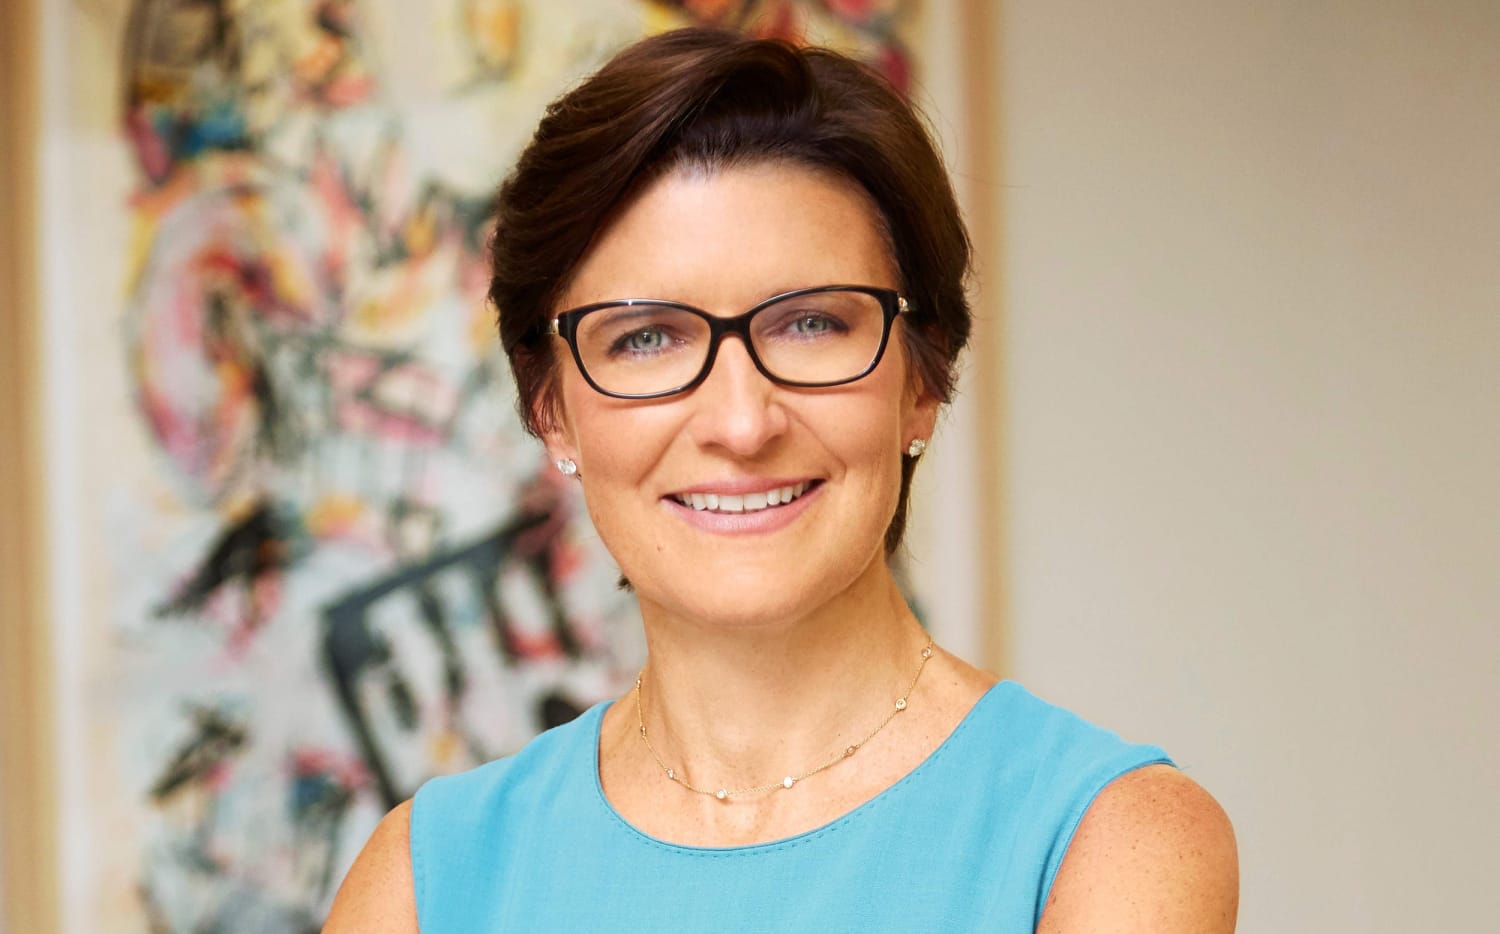 Citi appoints Jane Fraser as CEO, marking first time a Wall Street bank will be led by a woman